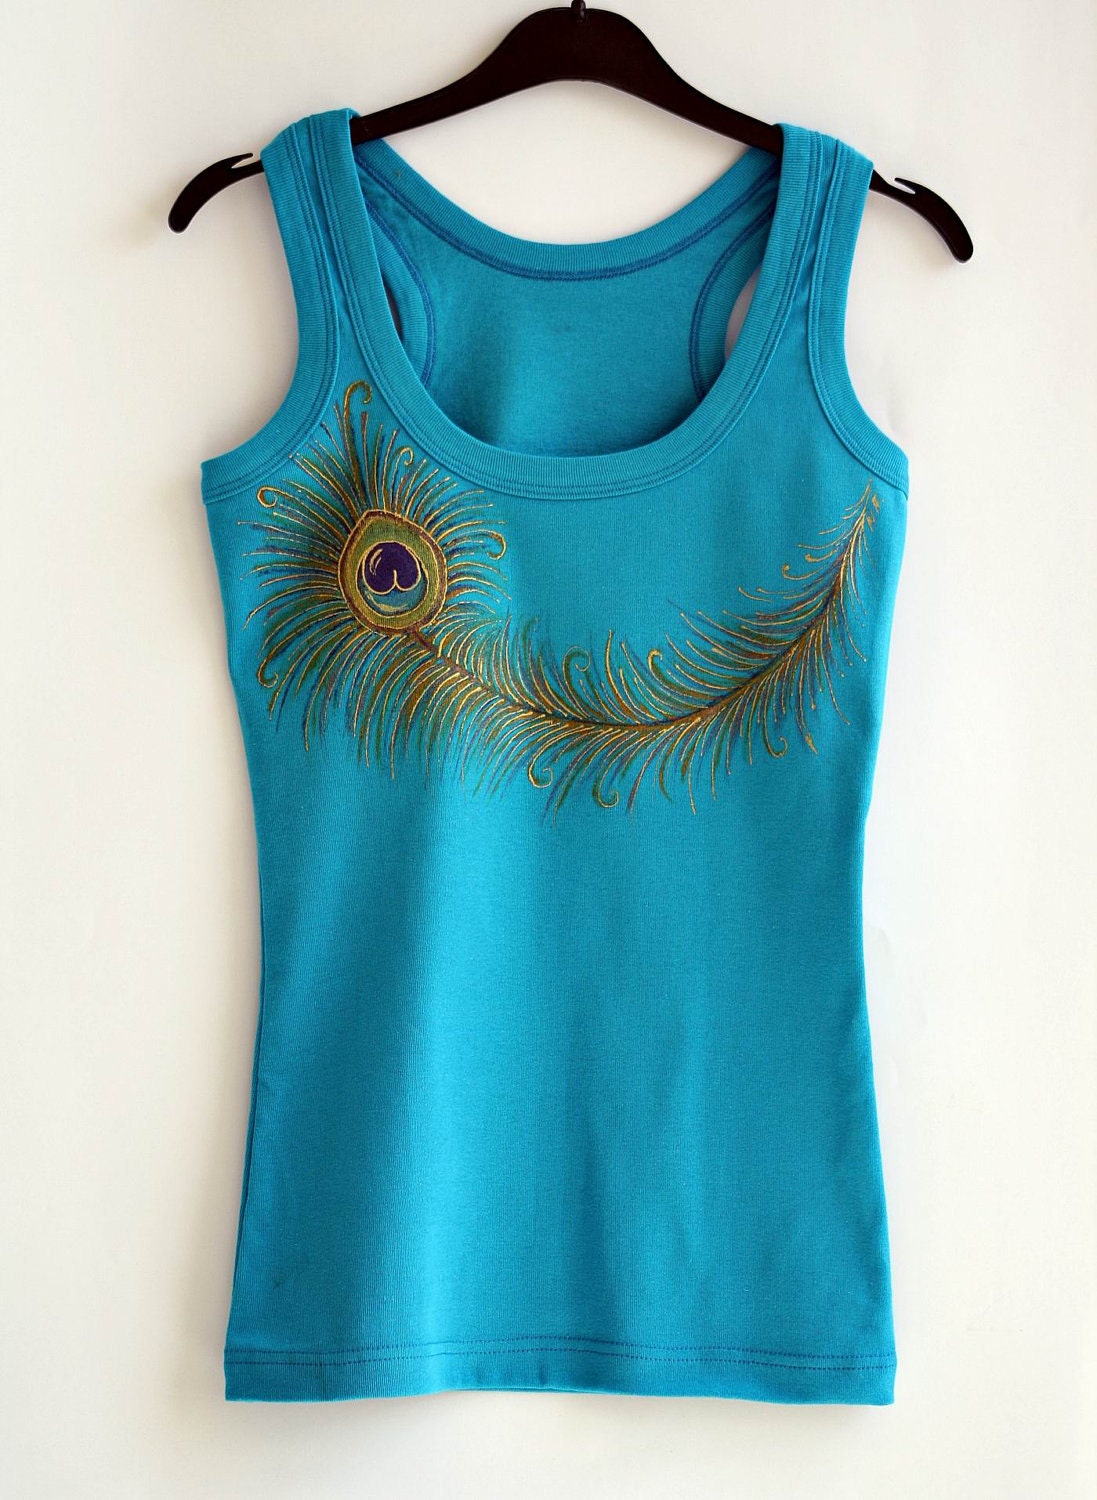 Peacock  Feather  Hand Painted Cotton Turquoise Top - MishMashStore